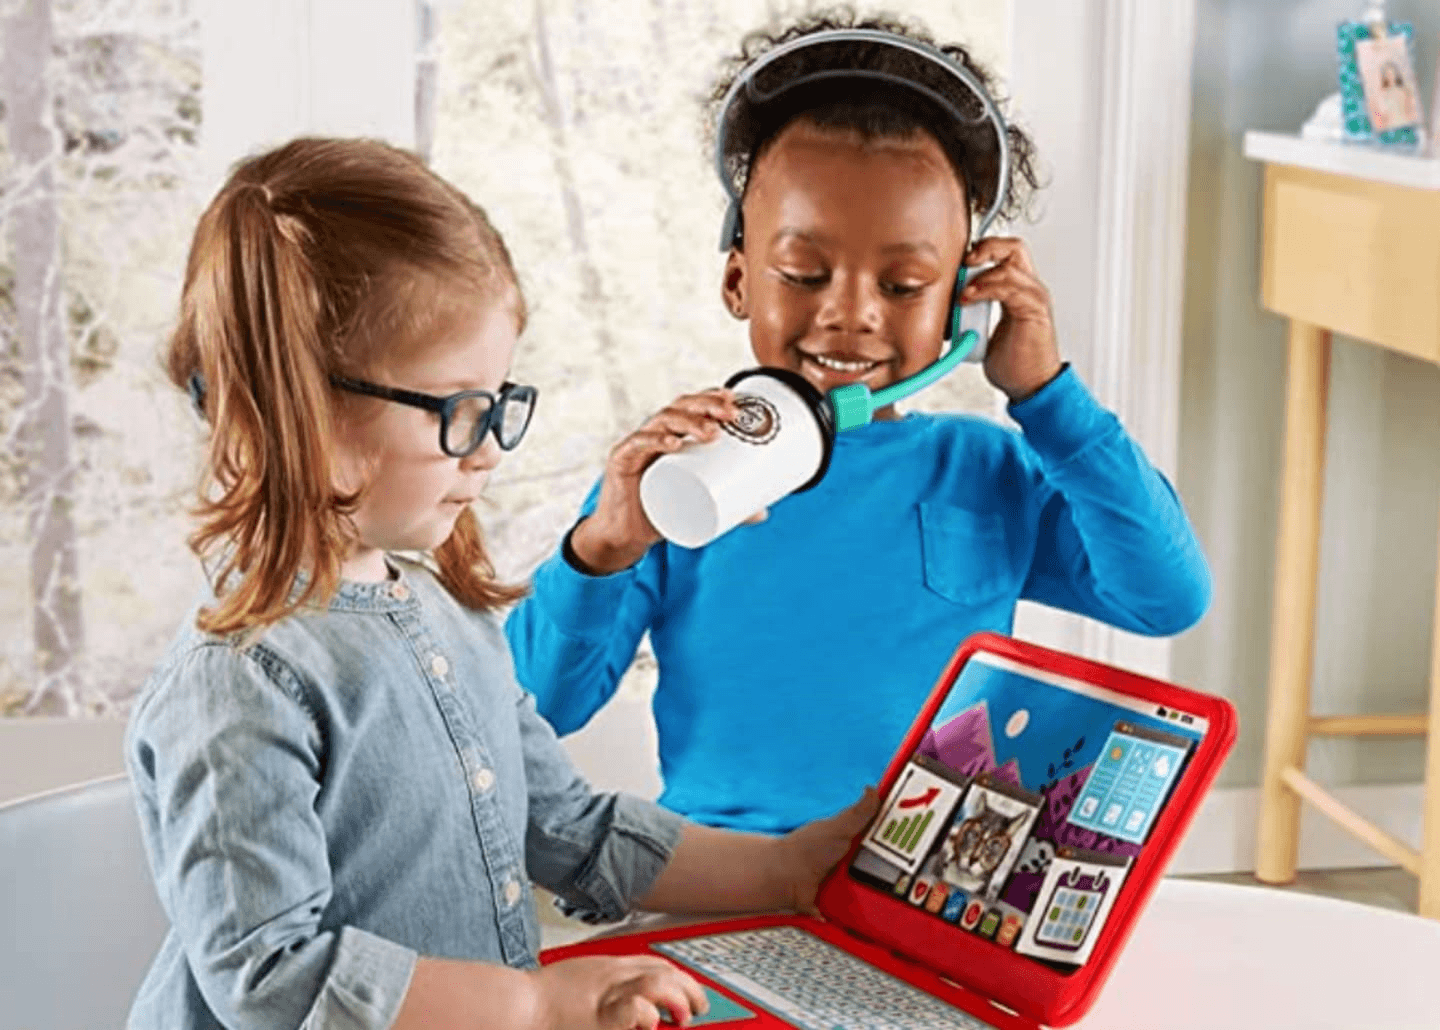 This 'Home-Office' playset is going viral, and honestly, we are here for it